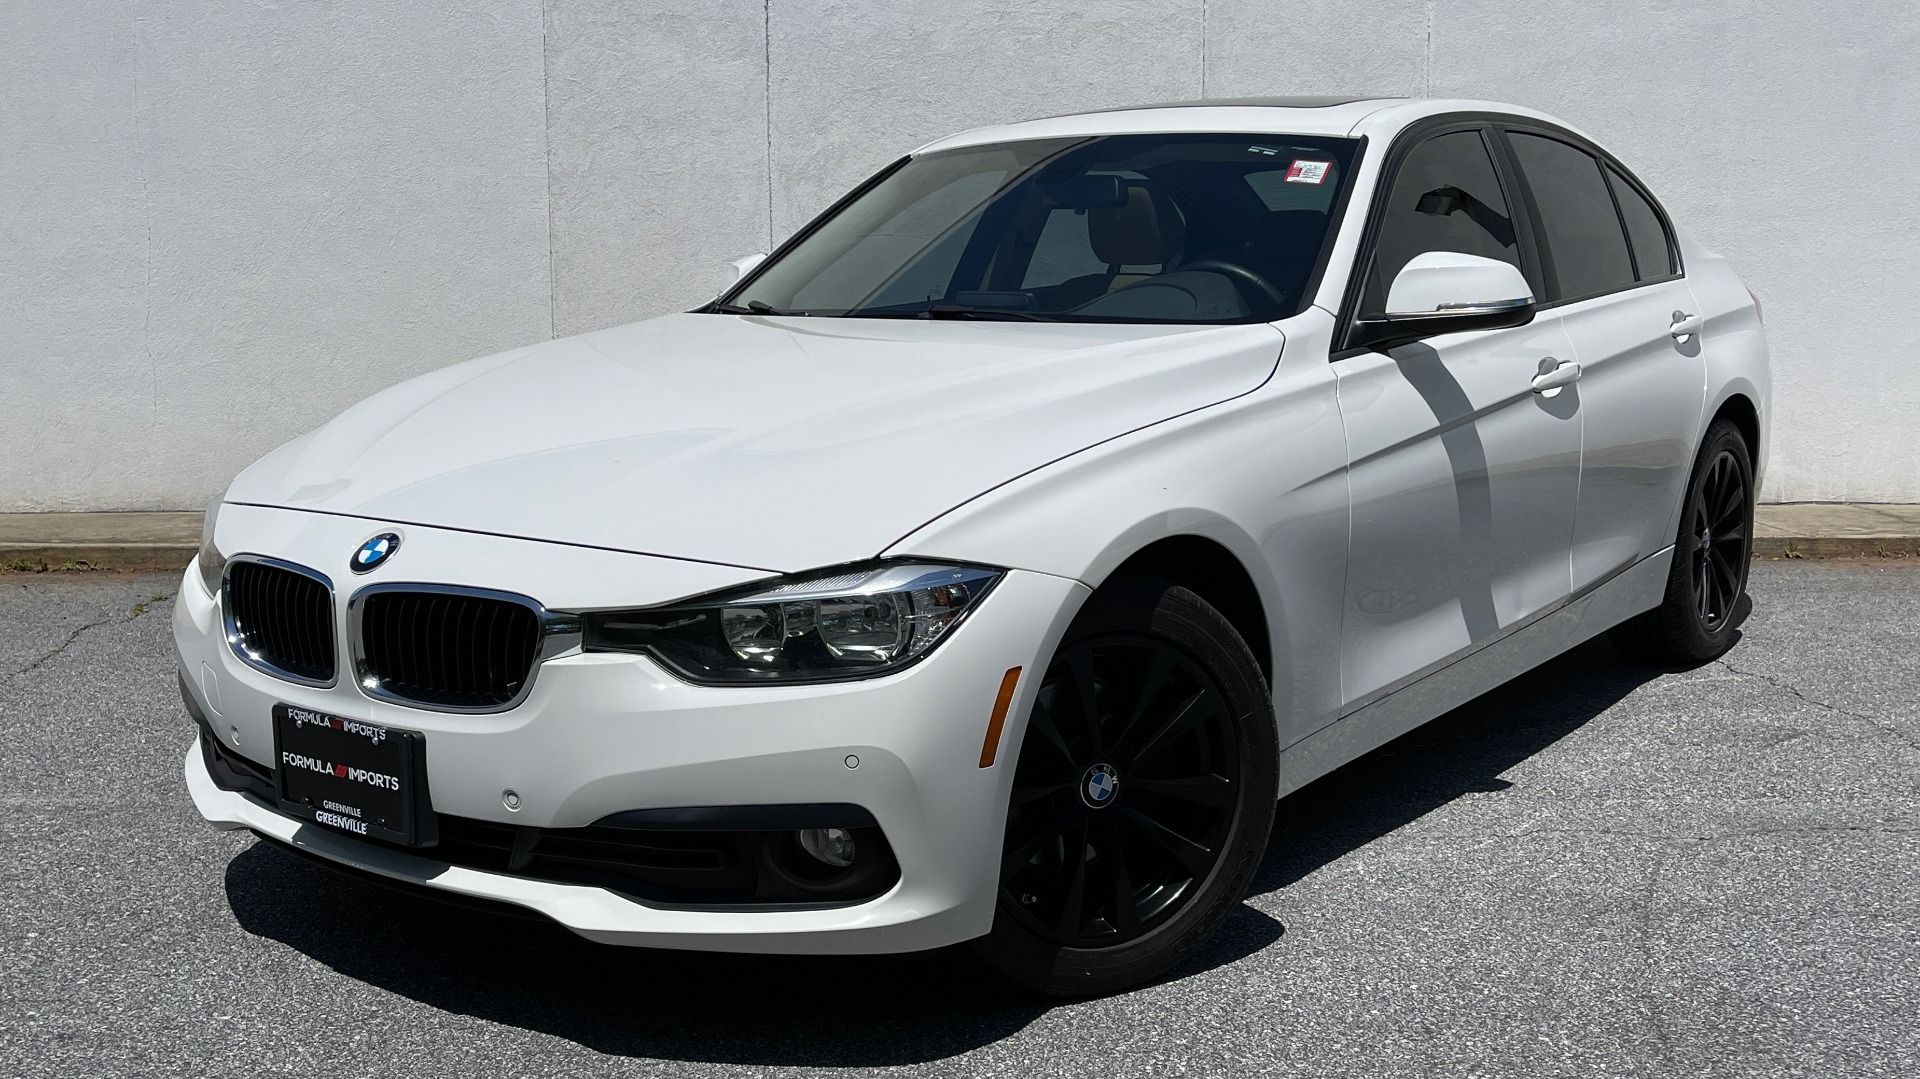 Used 2017 BMW 3 SERIES 320I XDRIVE SEDAN / DRVR ASST / SUNROOF / HTD STS / REARVIEW for sale $25,295 at Formula Imports in Charlotte NC 28227 1